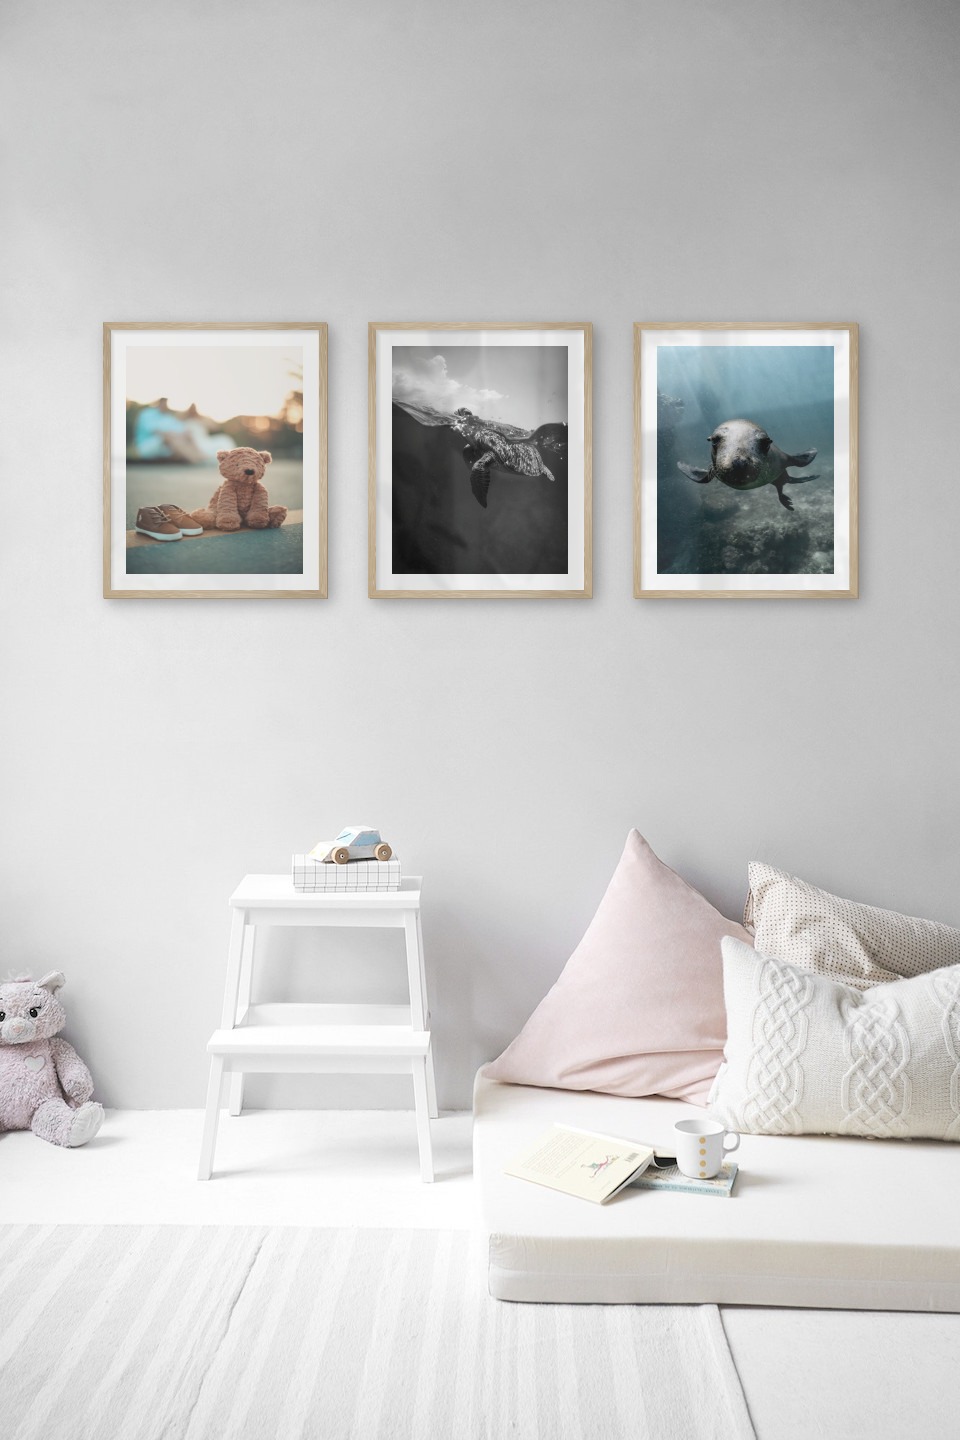 Gallery wall with picture frames in wood in sizes 40x50 with prints "Teddy bear on the street", "Turtle" and "Seal in the water"